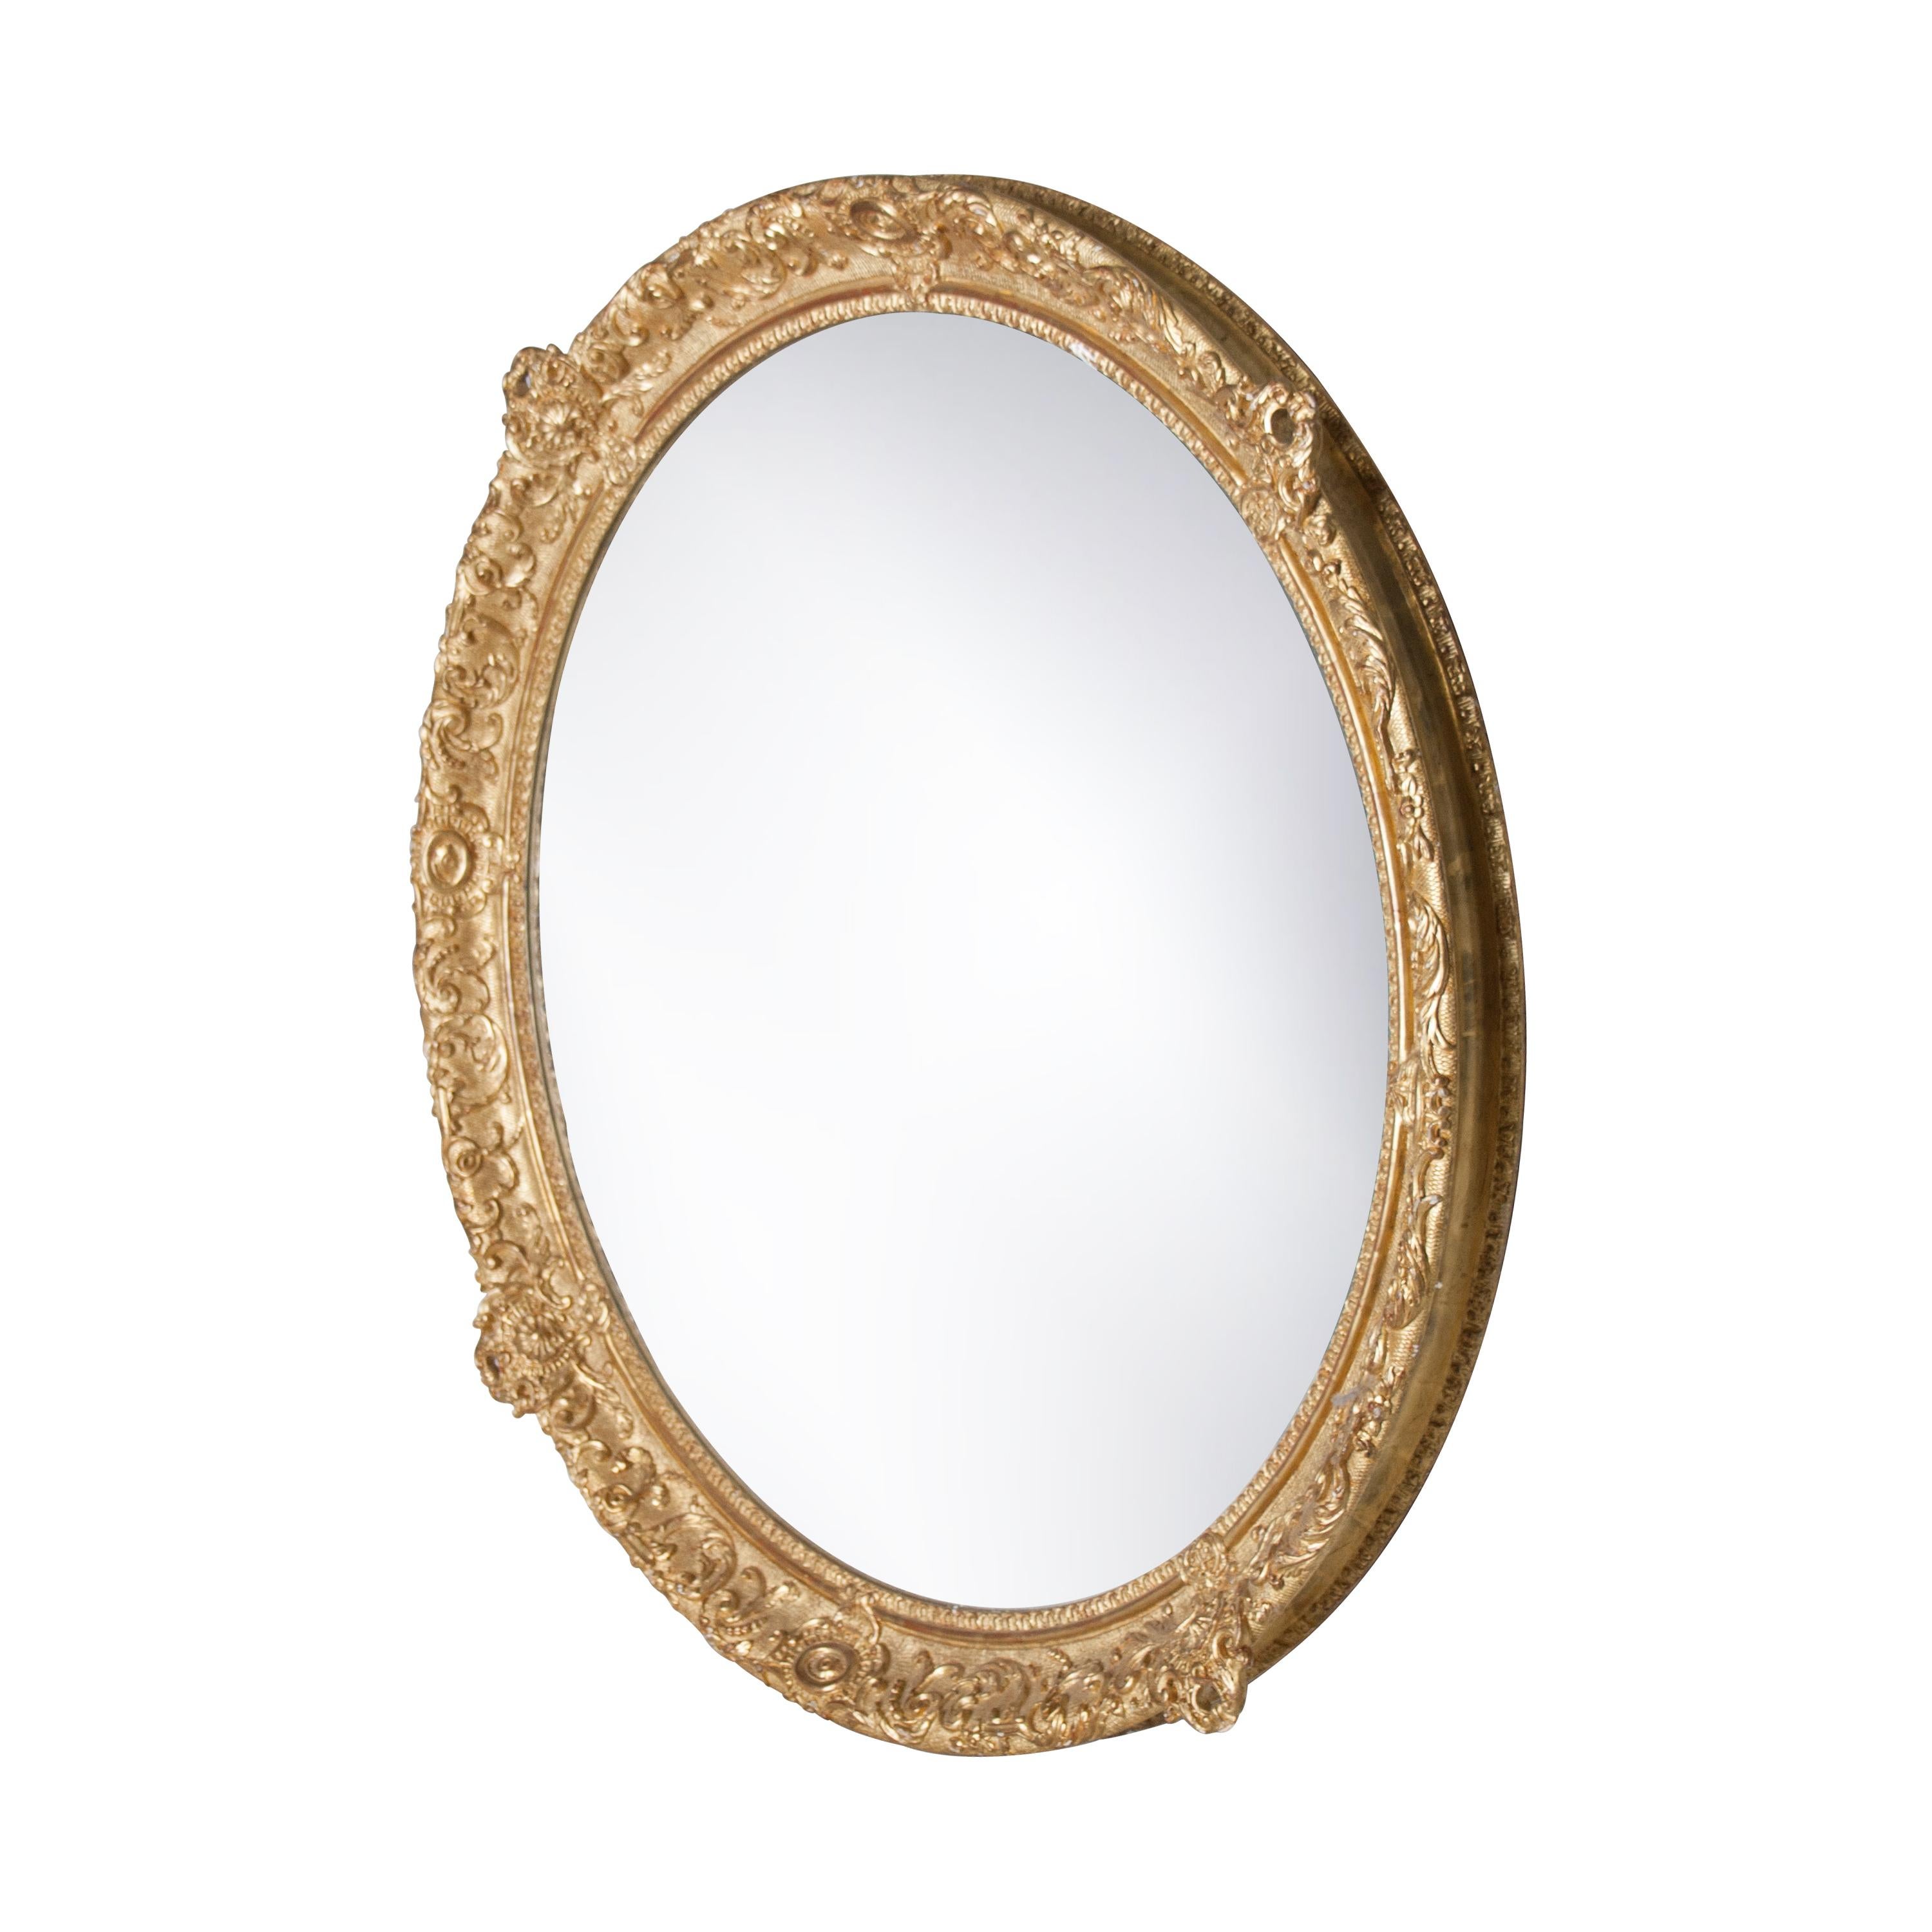 Neoclassical Regency style handcrafted mirror. Round hand carved wooden structure with gold finished. Spain, 1970.